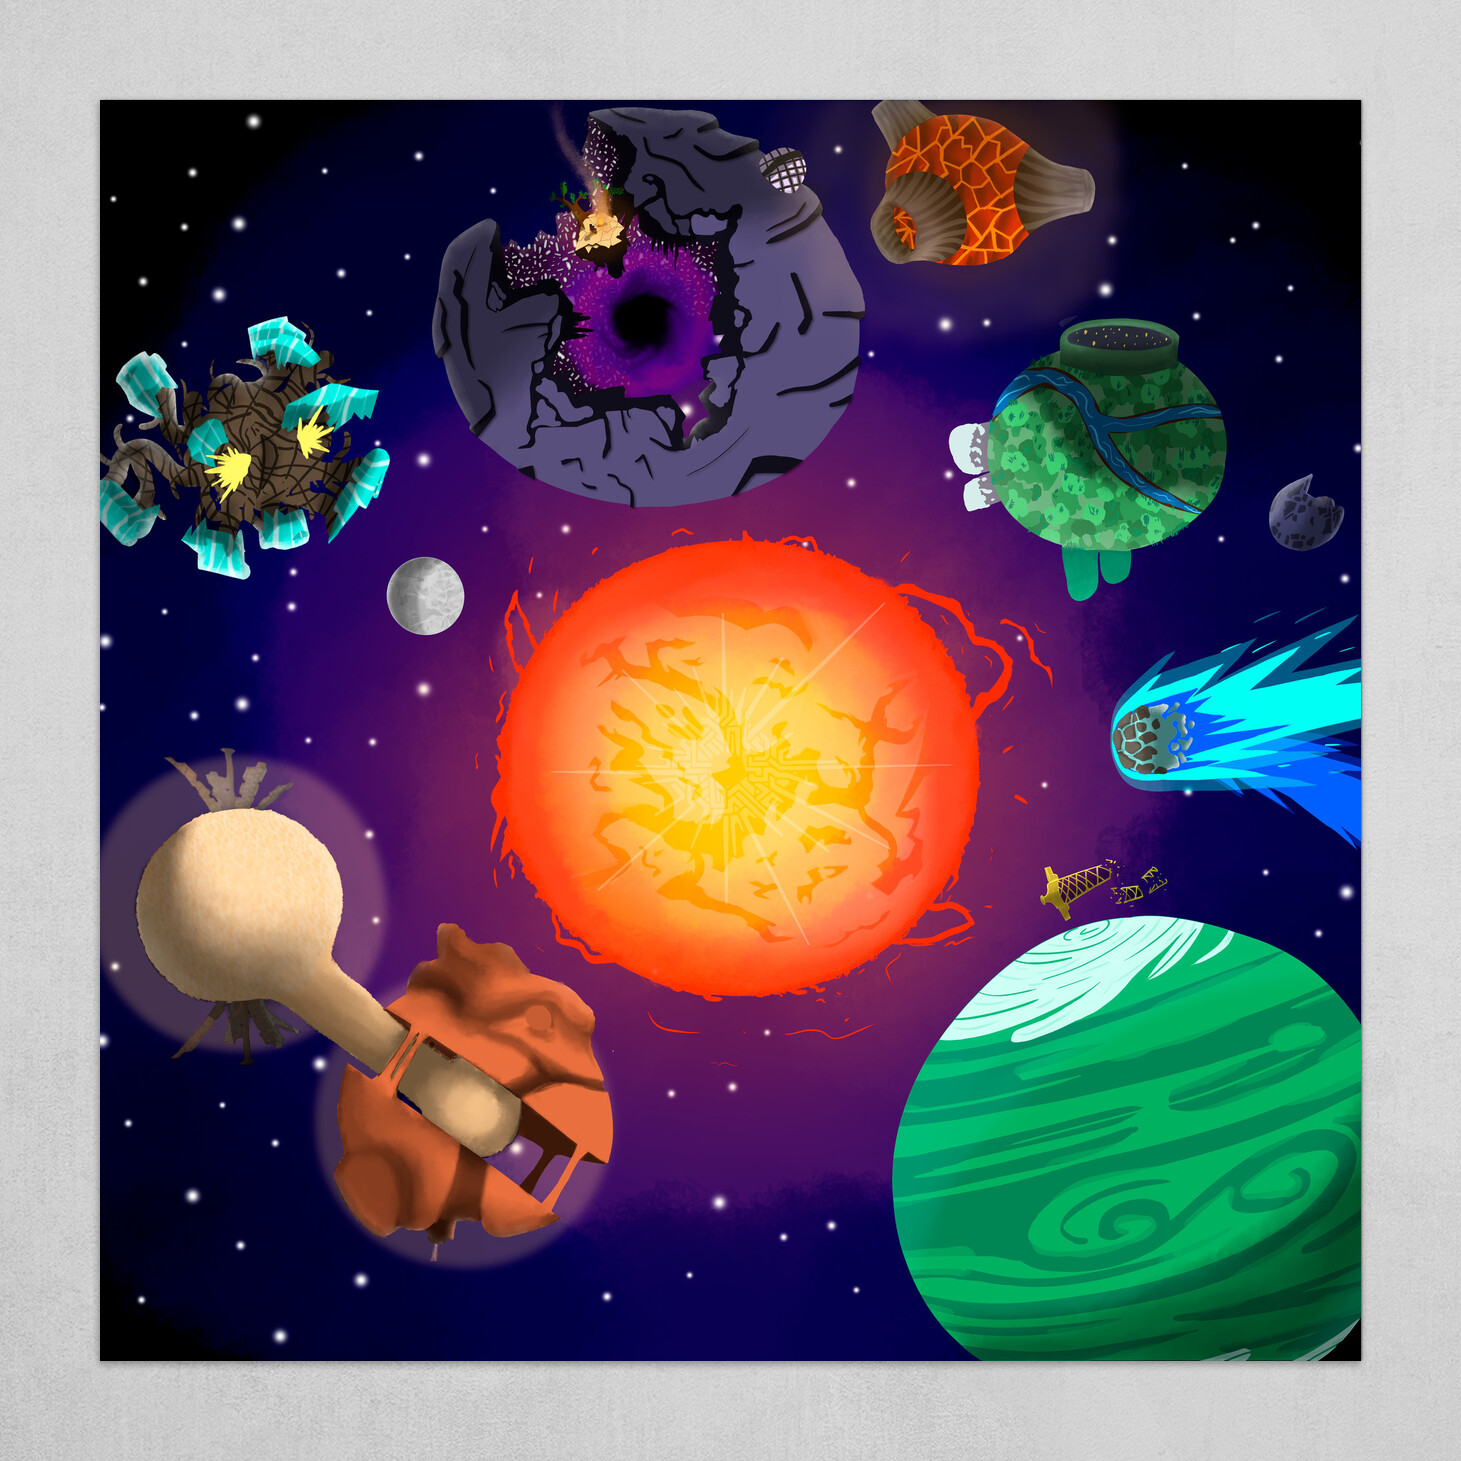 Outer Wilds Planets (64x64) by zarcy on DeviantArt